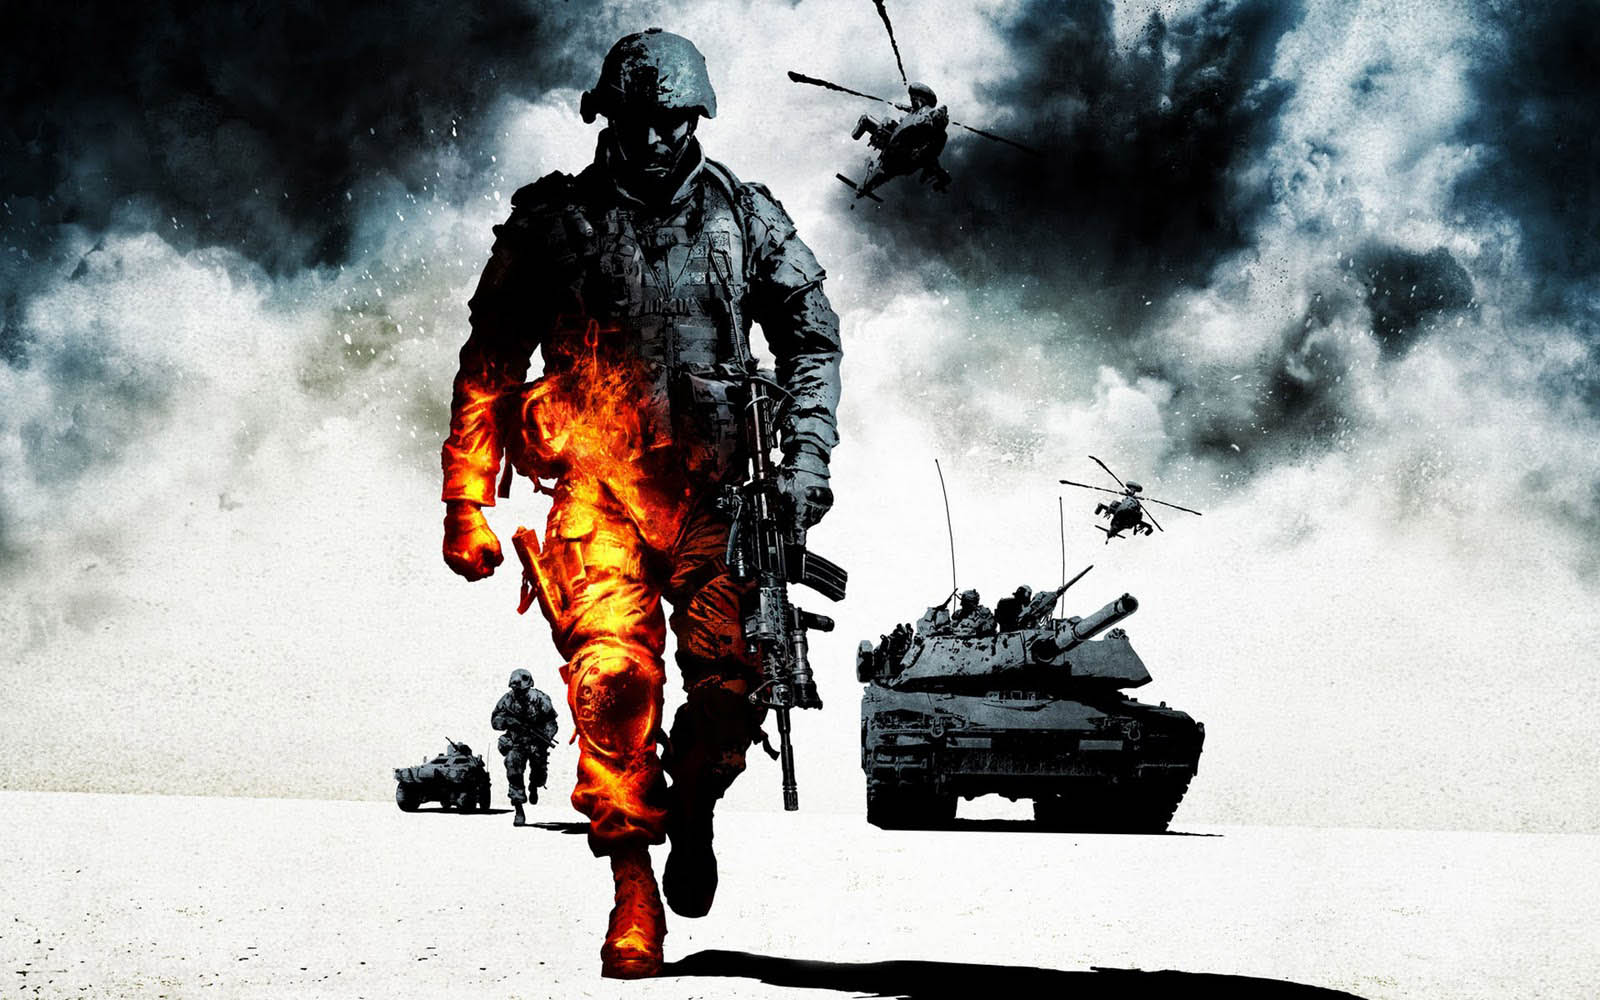 2013 Update Battlefield 3 Game Wallpapers - Windows 7 Hd Wallpapers Army , HD Wallpaper & Backgrounds